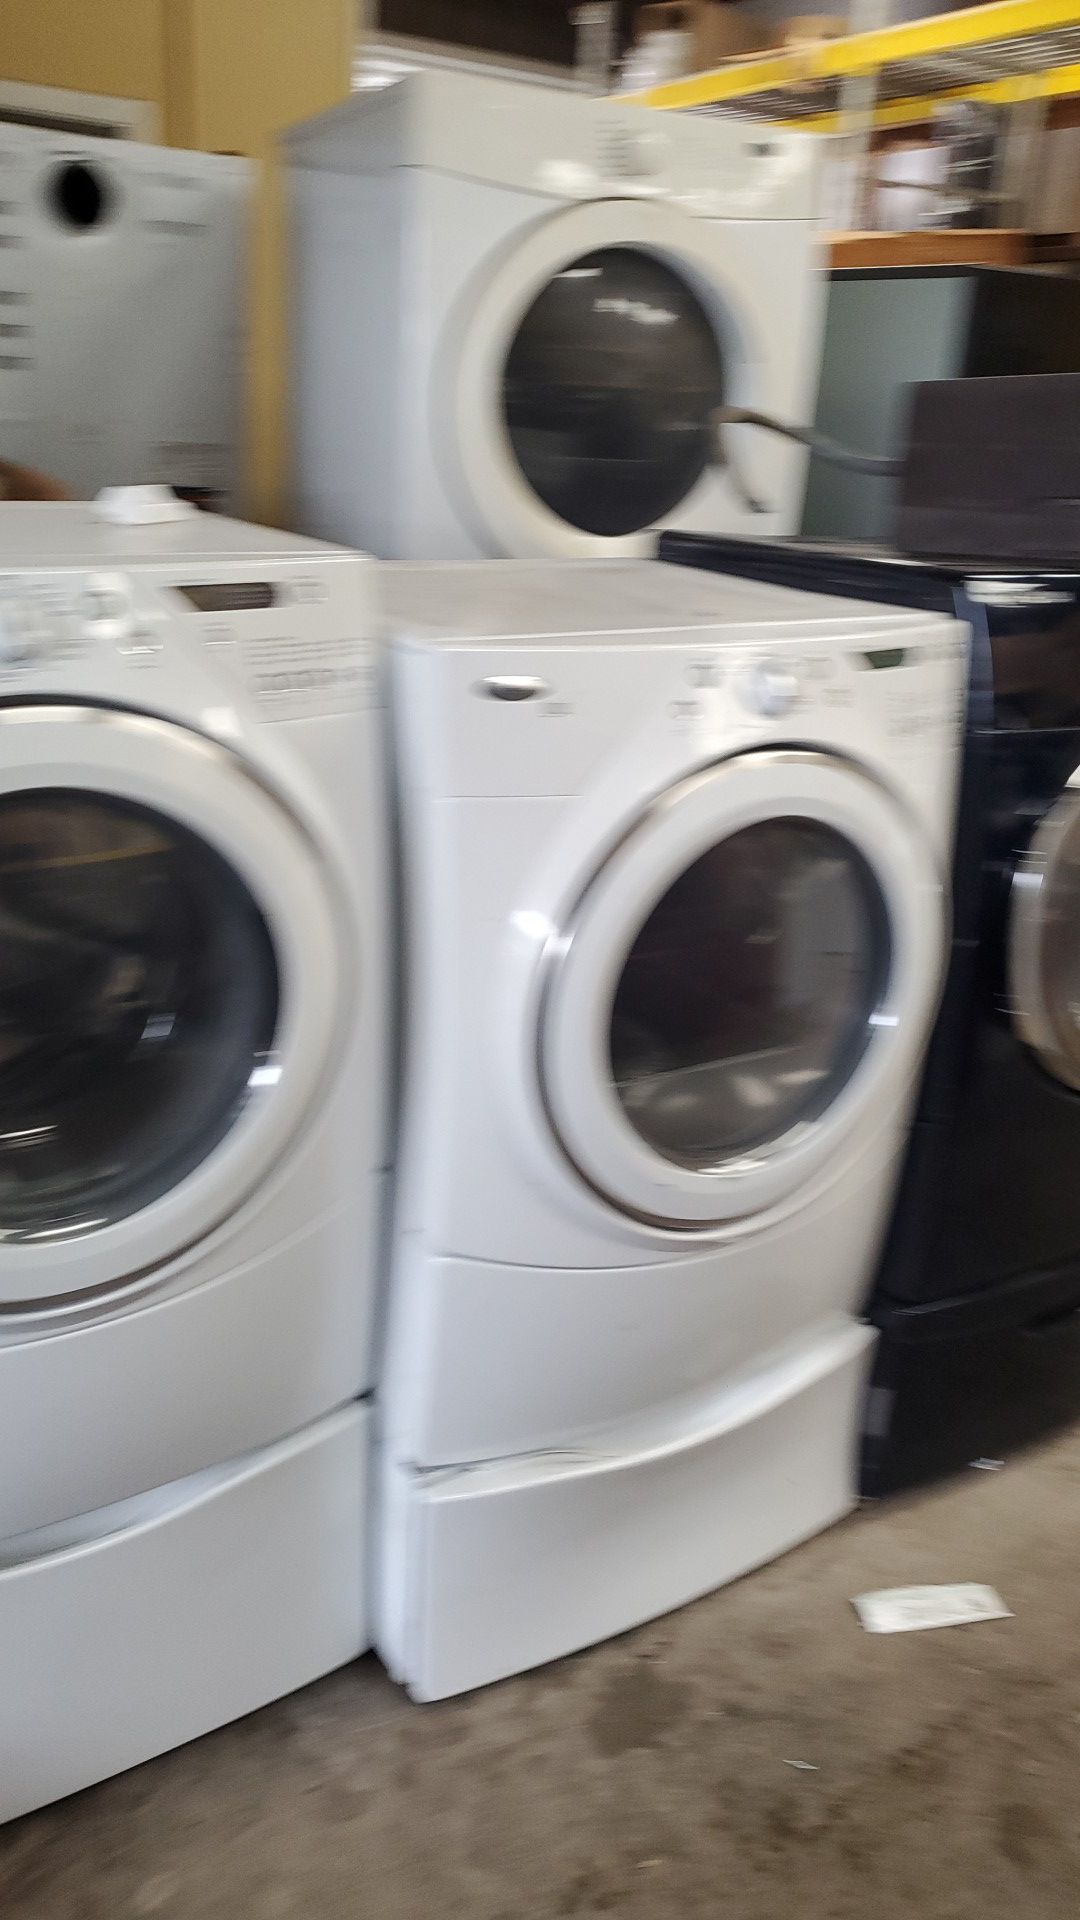 Whirlpool duet front load washer and dryer